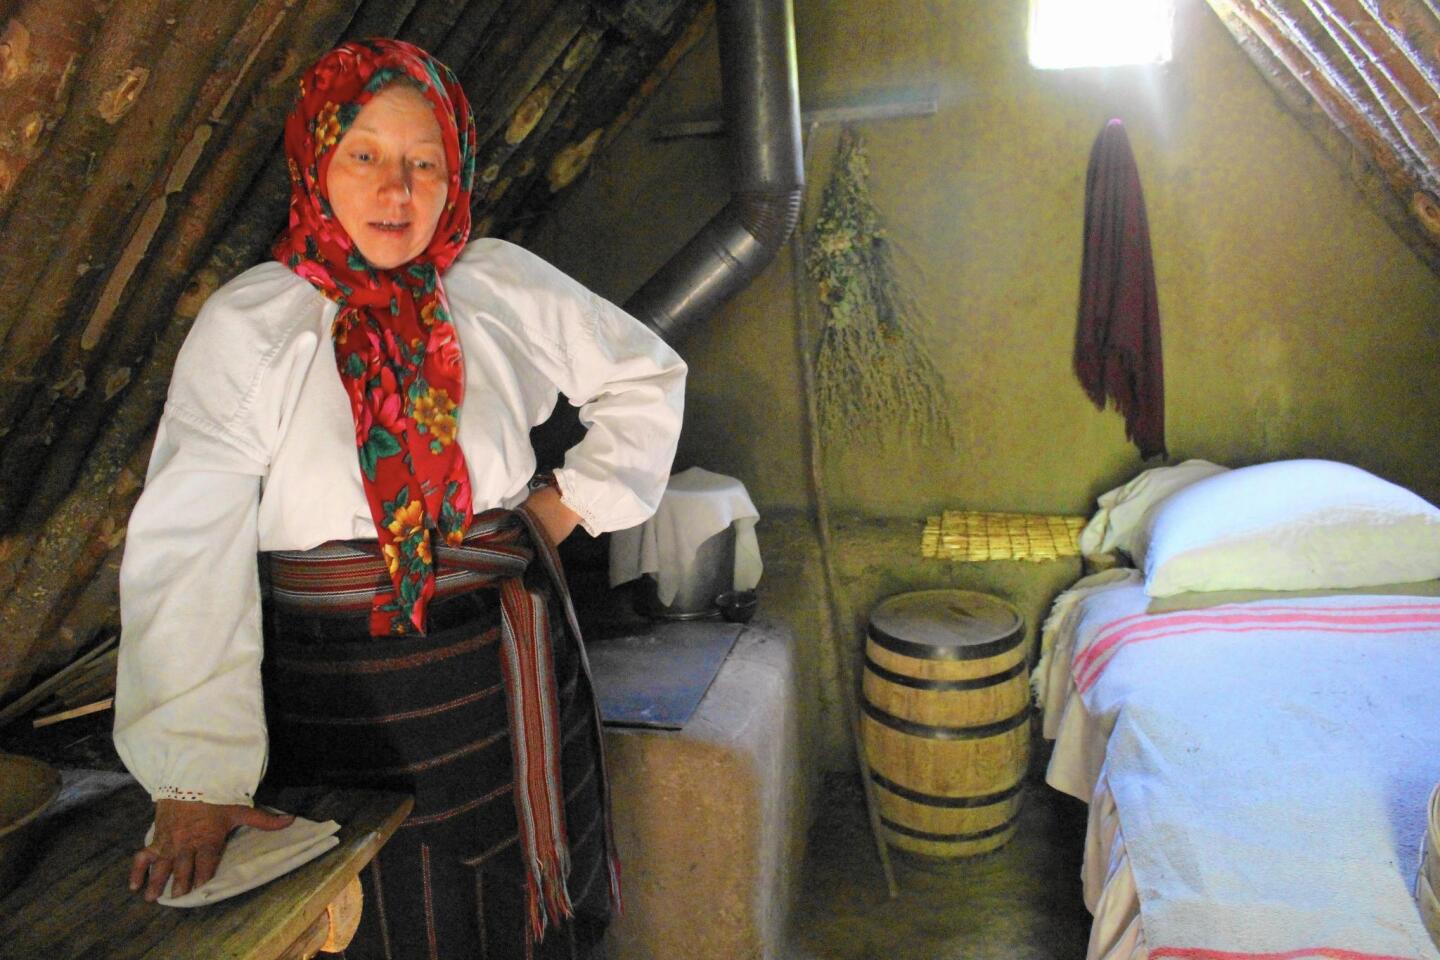 Maria, a Ukraine immigrant, explains life as a settler in pre-1900 Alberta from her dugout home at the Ukrainian Cultural Heritage Village, near Edmonton.